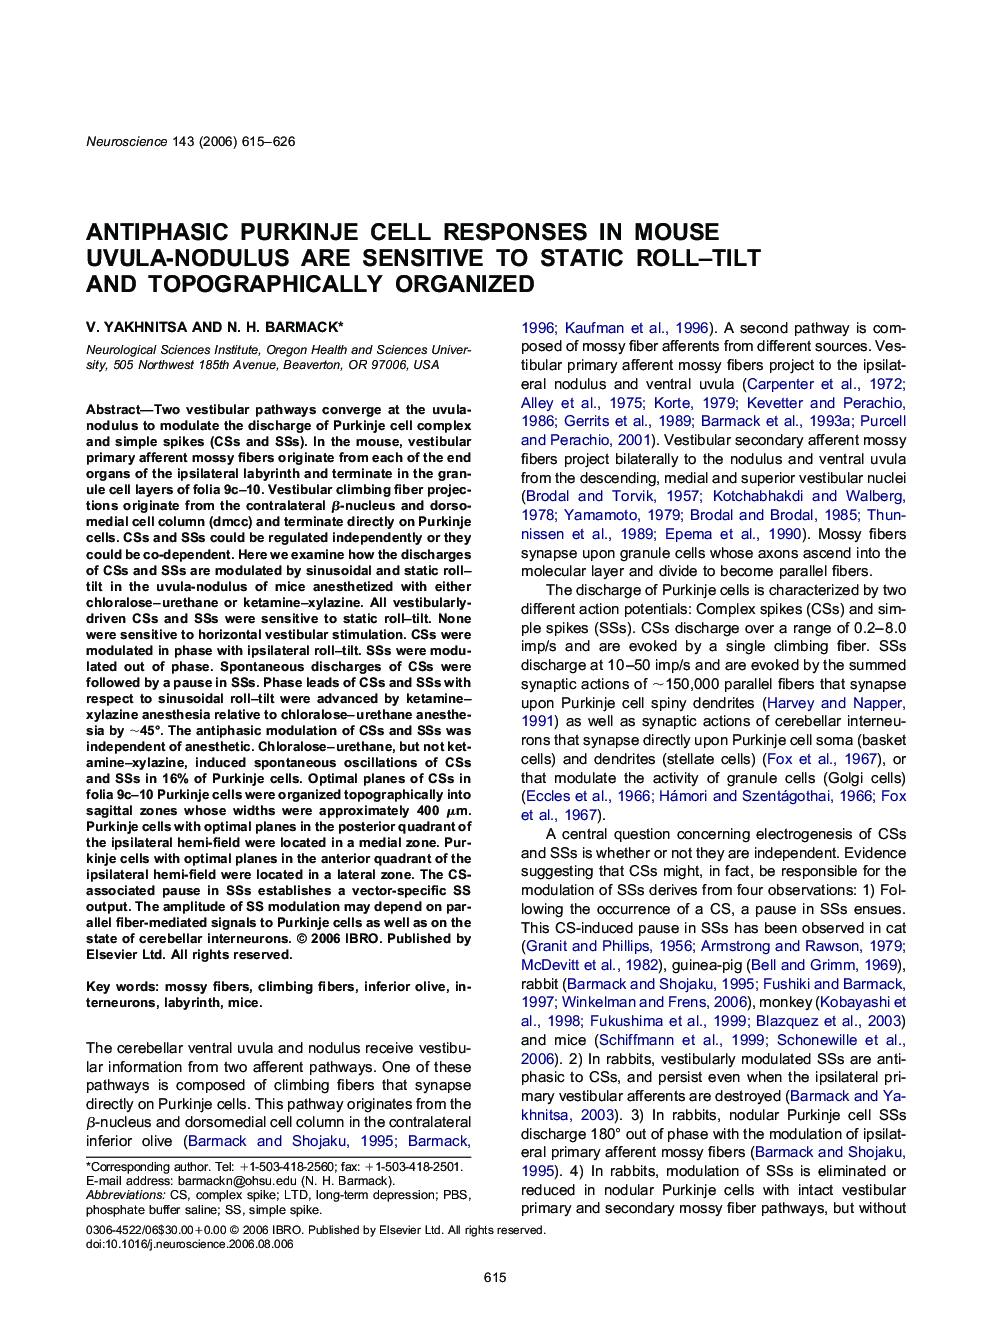 Antiphasic Purkinje cell responses in mouse uvula-nodulus are sensitive to static roll–tilt and topographically organized